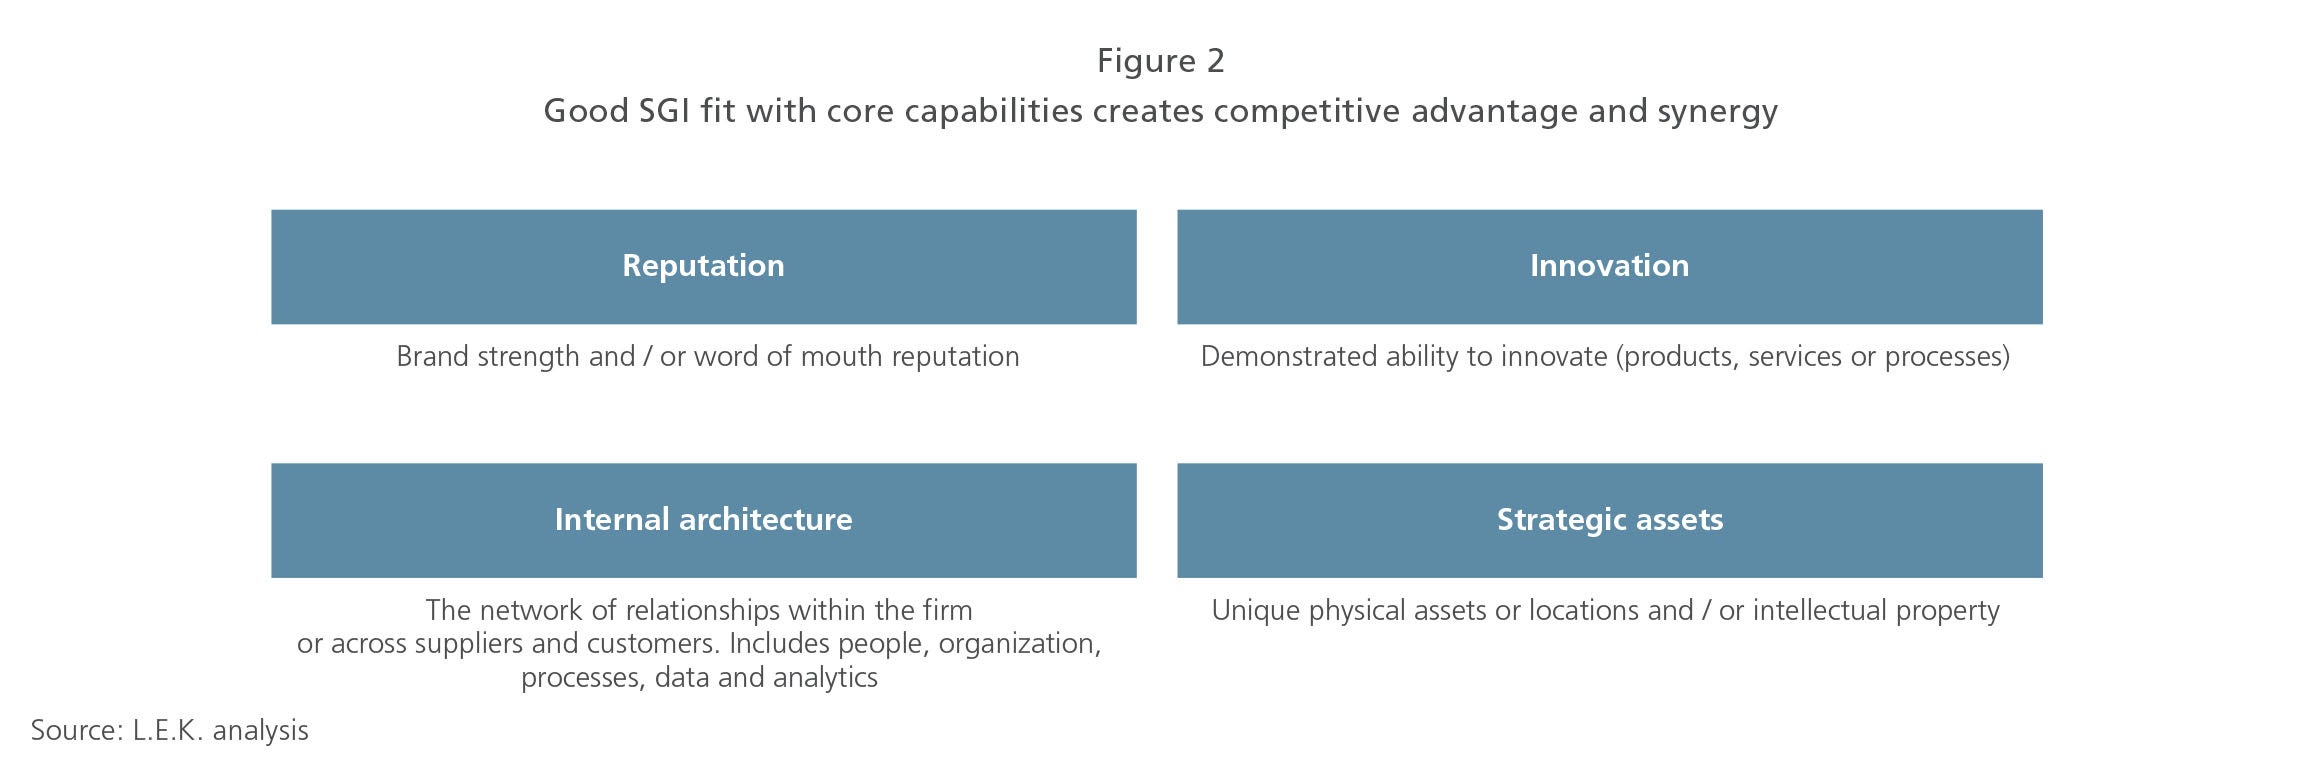 Good SGI fit with core capabilities for competitive advantage and synergy